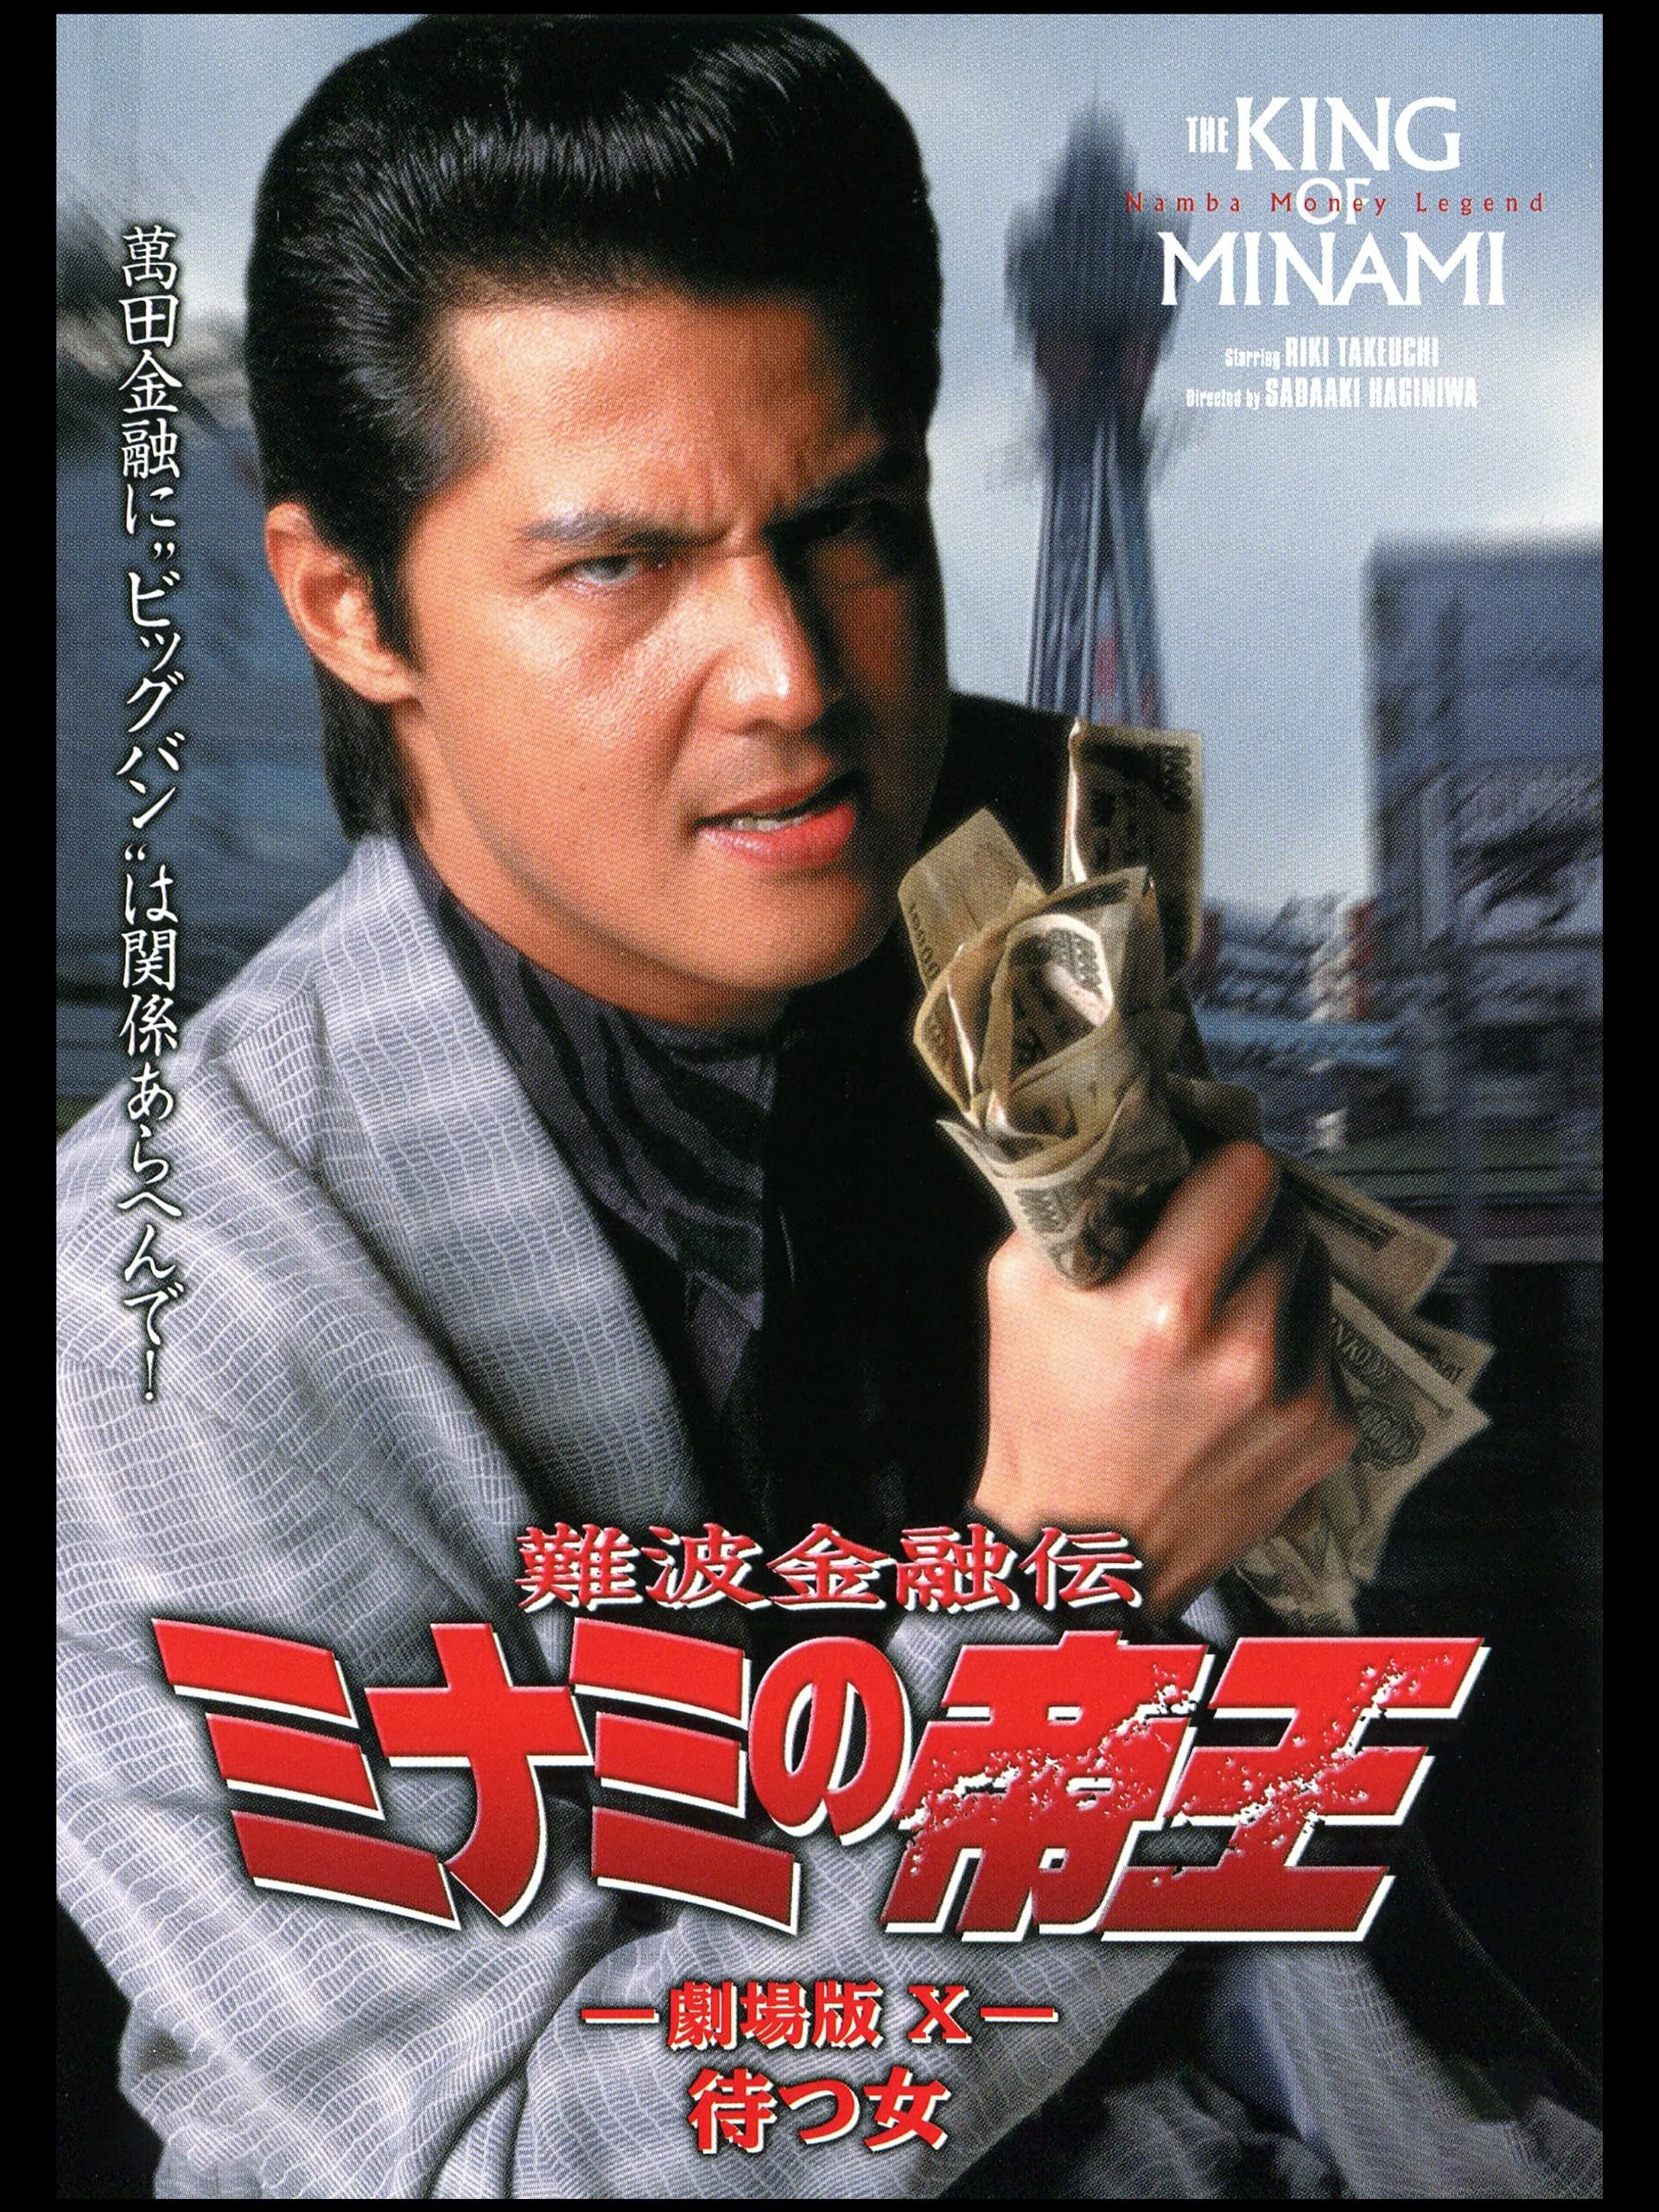 The King of Minami: The Movie X